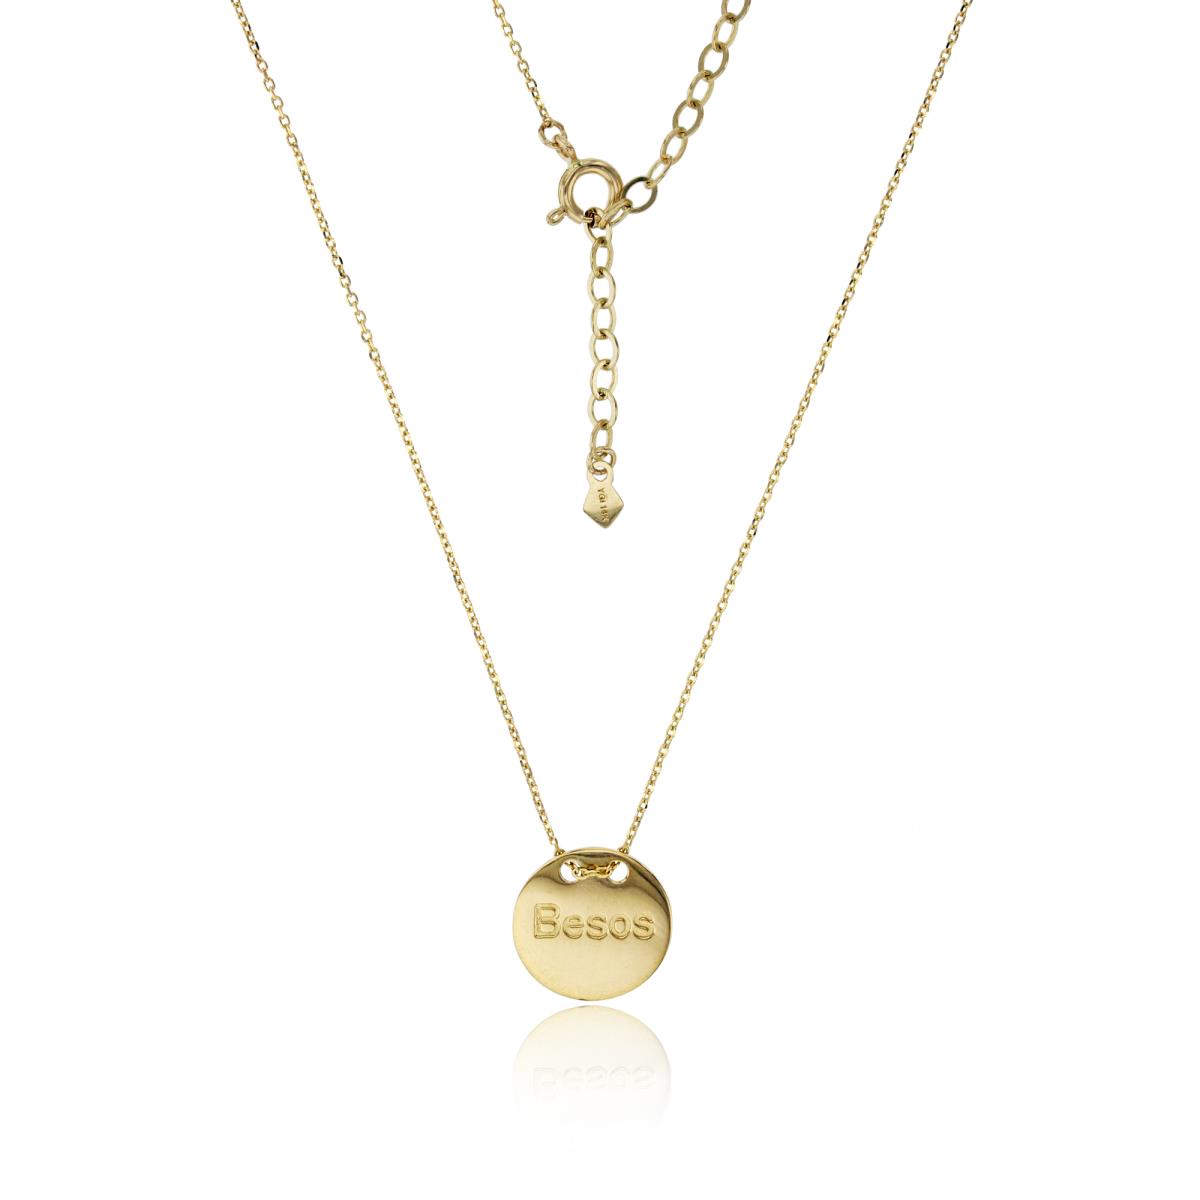 14K Yellow Gold Polished "Besos/Kisses" Engraved Circle Plate 16"+2" Necklace